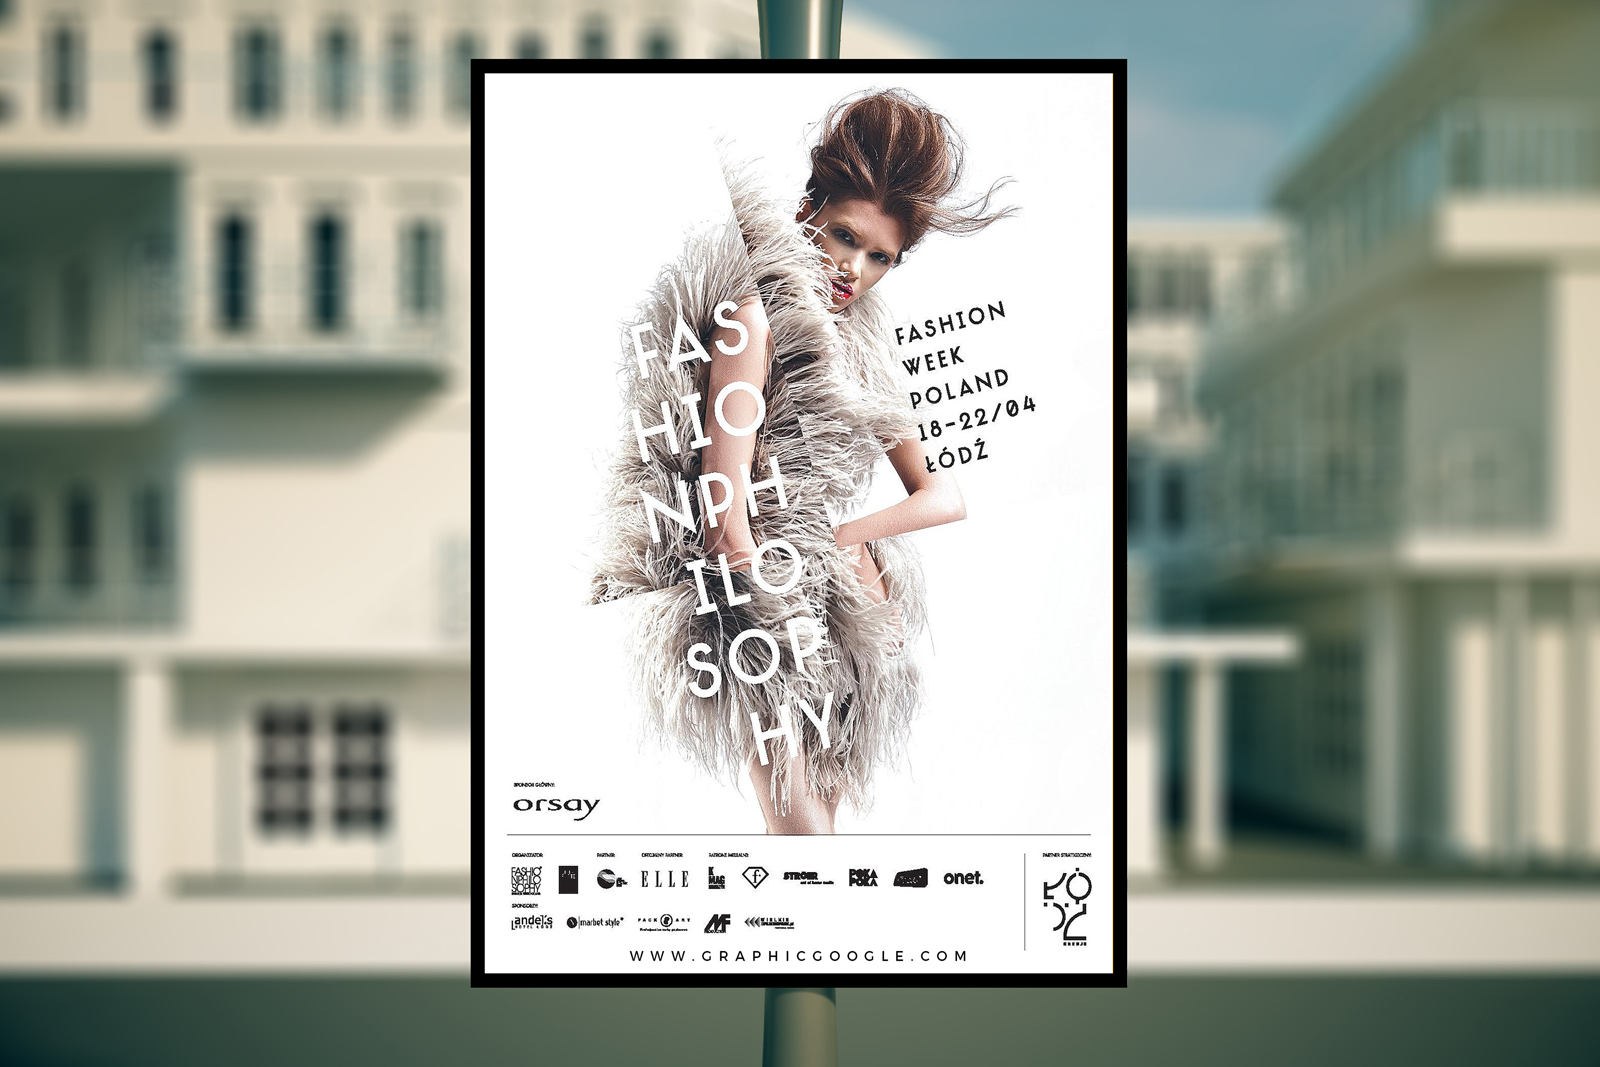 Free Outdoor Advertising Poster Mock-up PsdGraphic Google ...